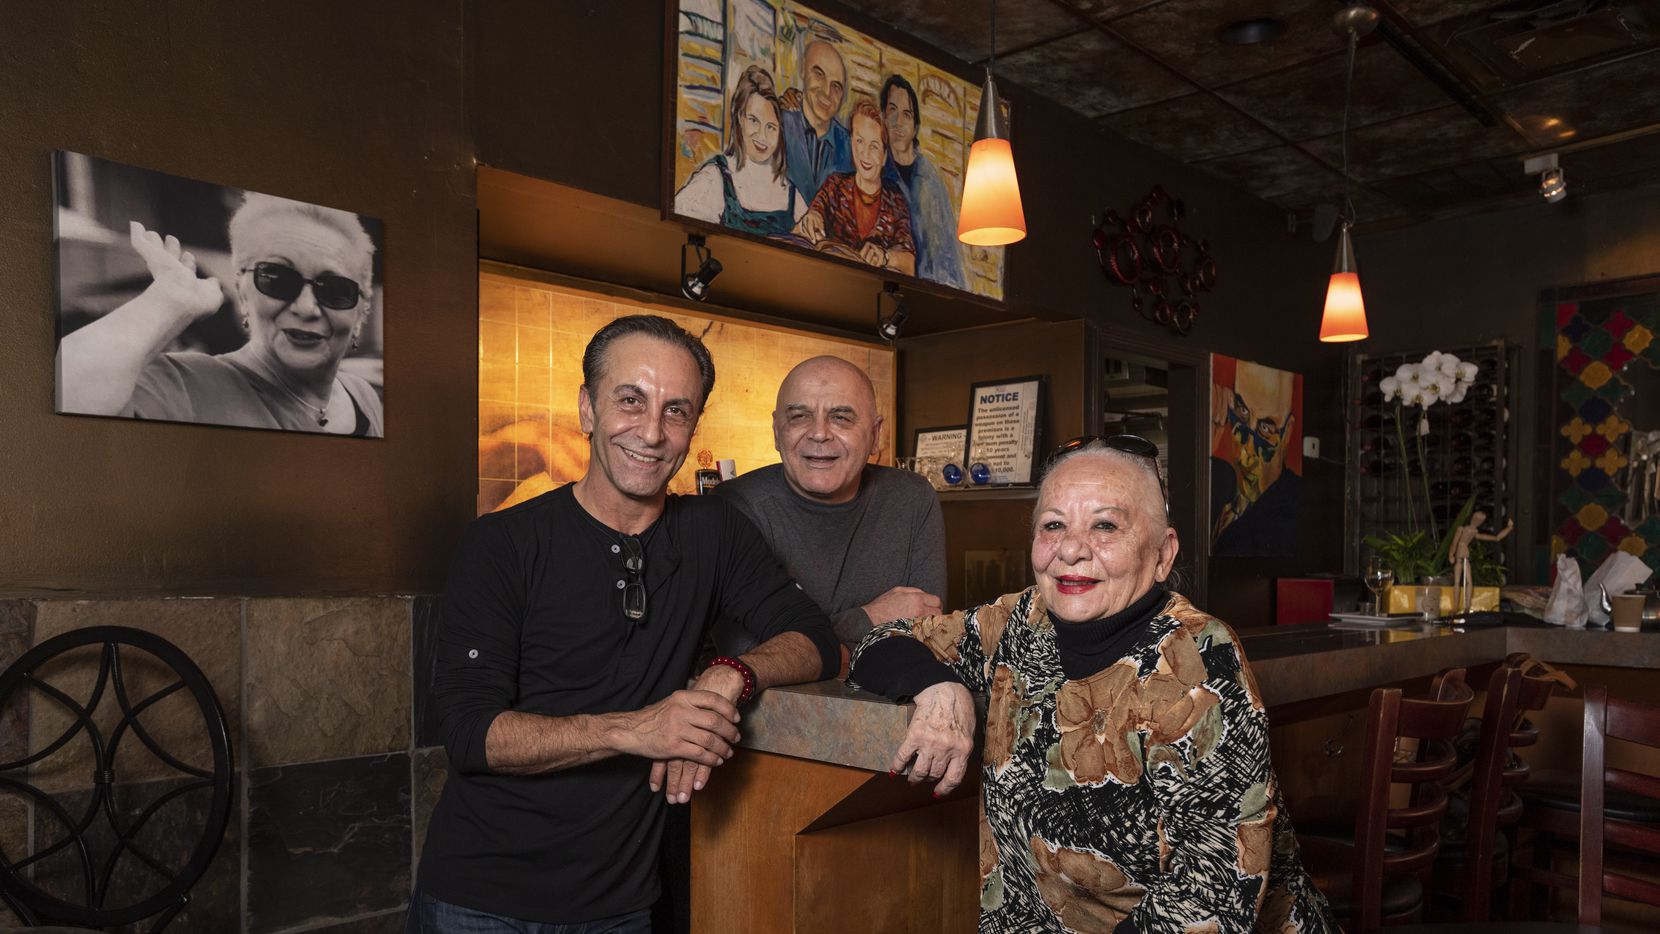 The Nazary family, Beau Nazary, left, Ali Nazary and their mother Nazy Nazary, at their restaurant Cafe Izmir in Dallas